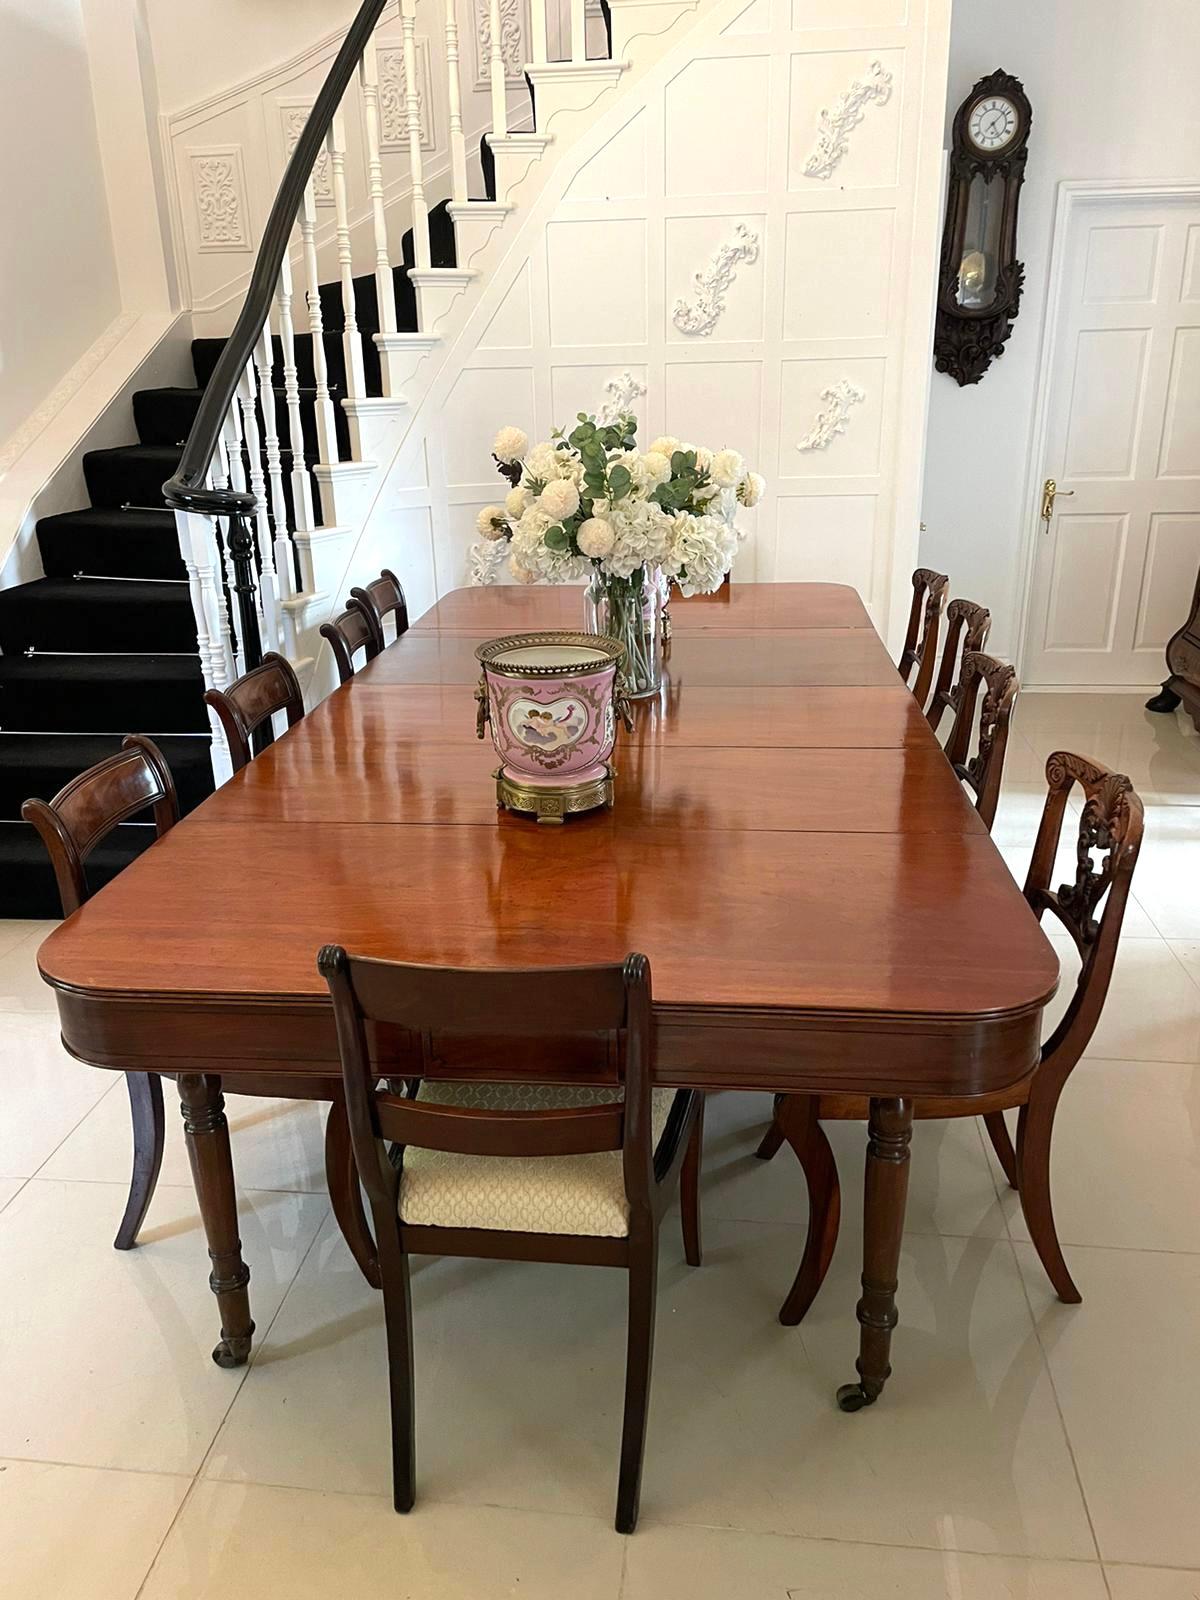 Rare metamorphic antique George III quality mahogany extending dining table having a quality mahogany top with a reeded edge and 3 original extra leaves standing on 8 turned tapering mahogany legs with original brass castors

This fabulous table